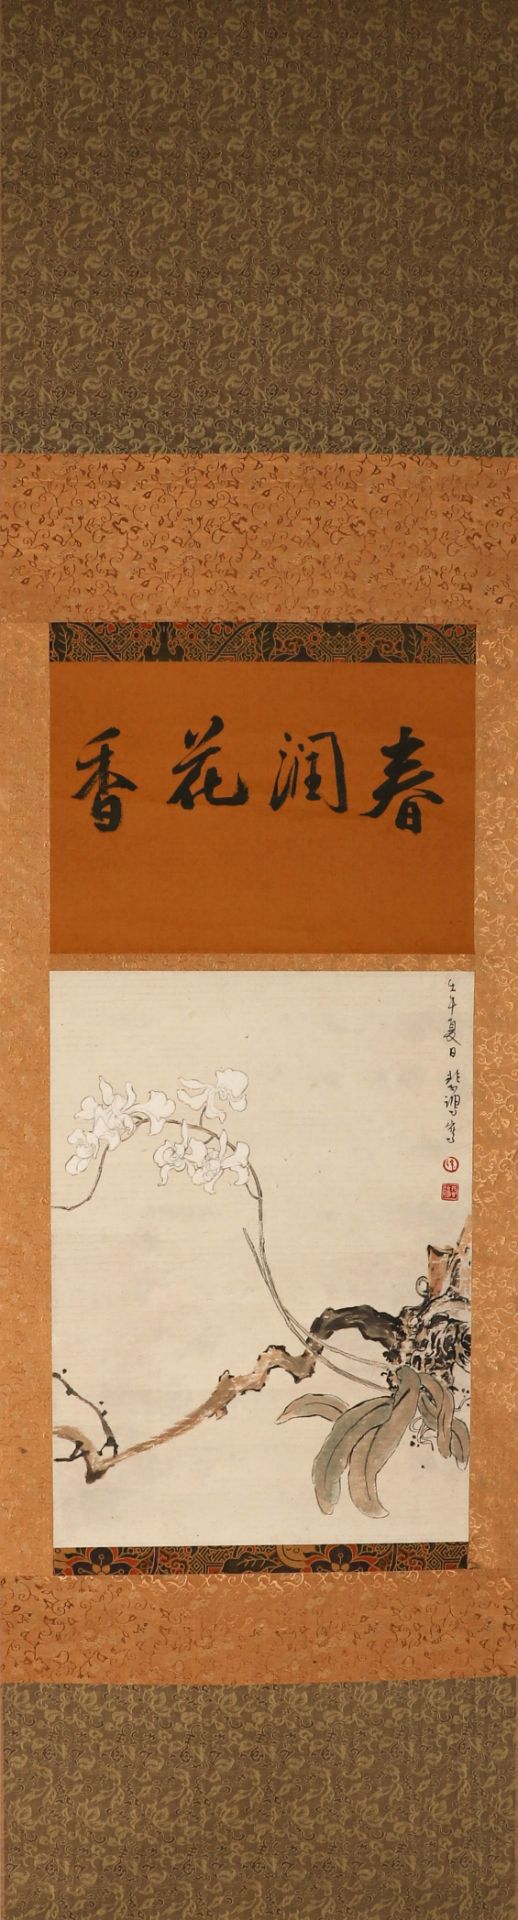 Flowers painting on paper by Xu Beihong  - Image 3 of 22